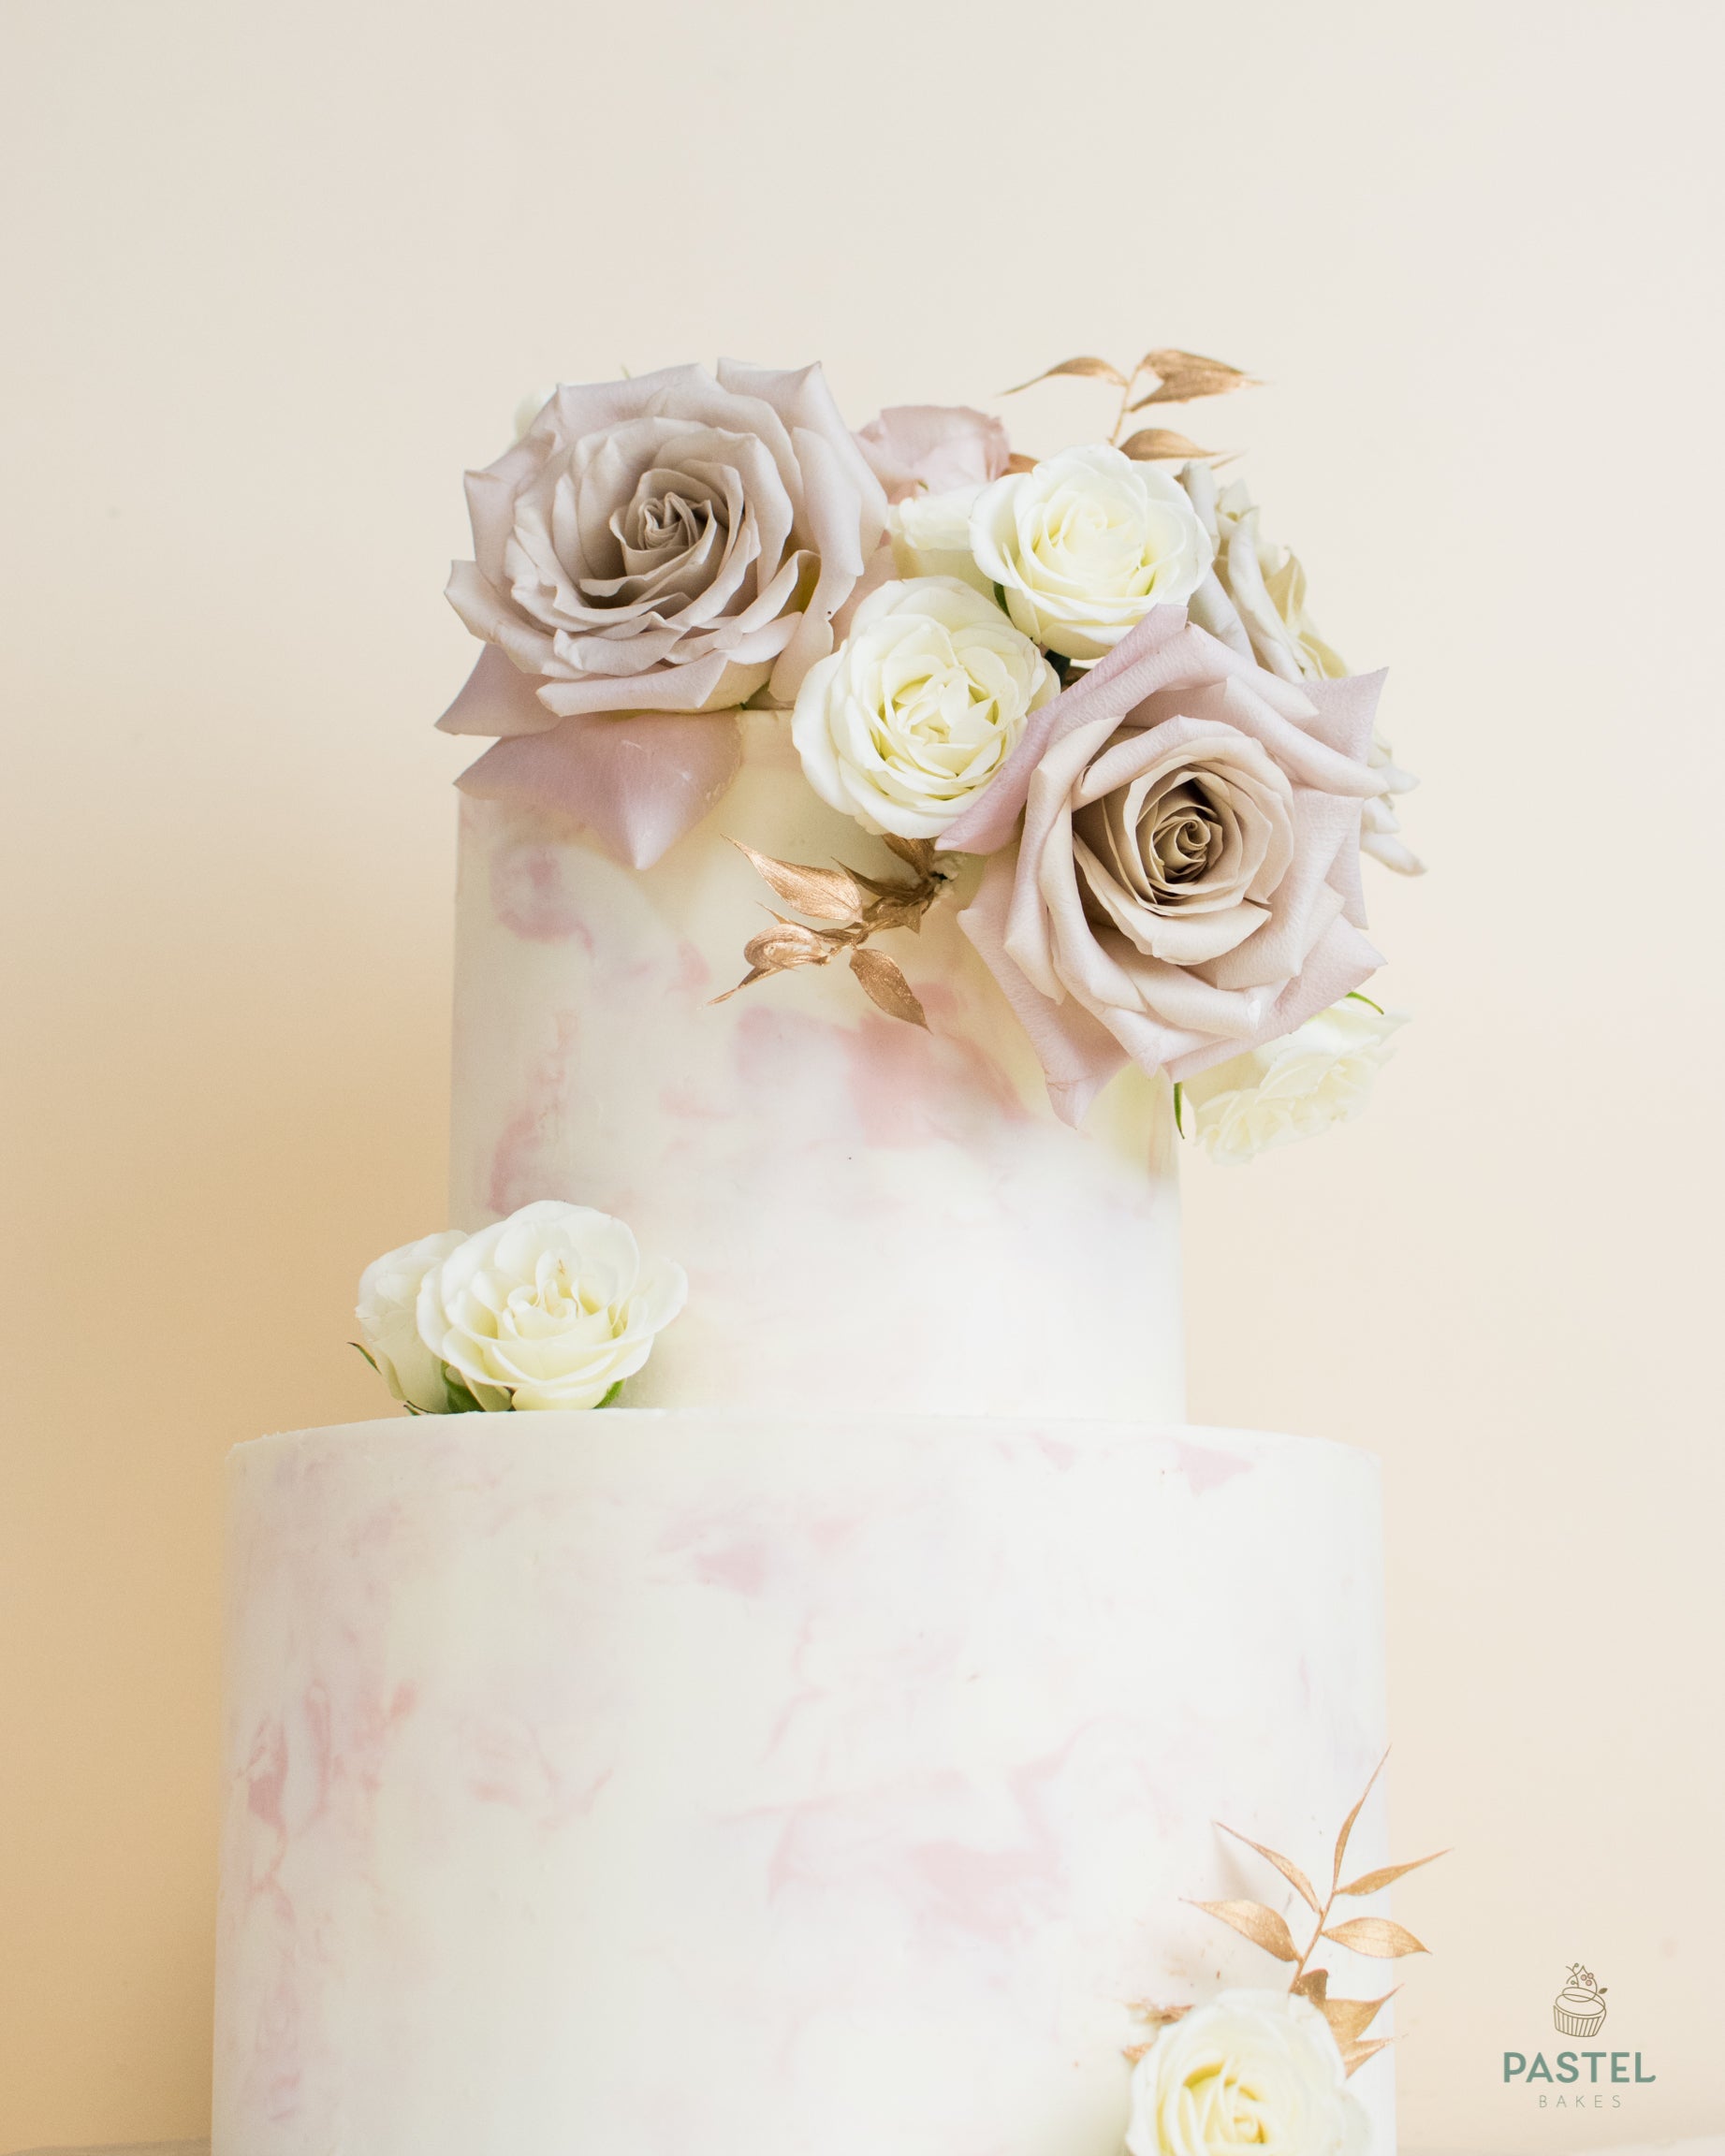 A high two-layer light-purple cake with a decorative rose bouquet at the top, two white roses between layers, and one white rose at the bottom.